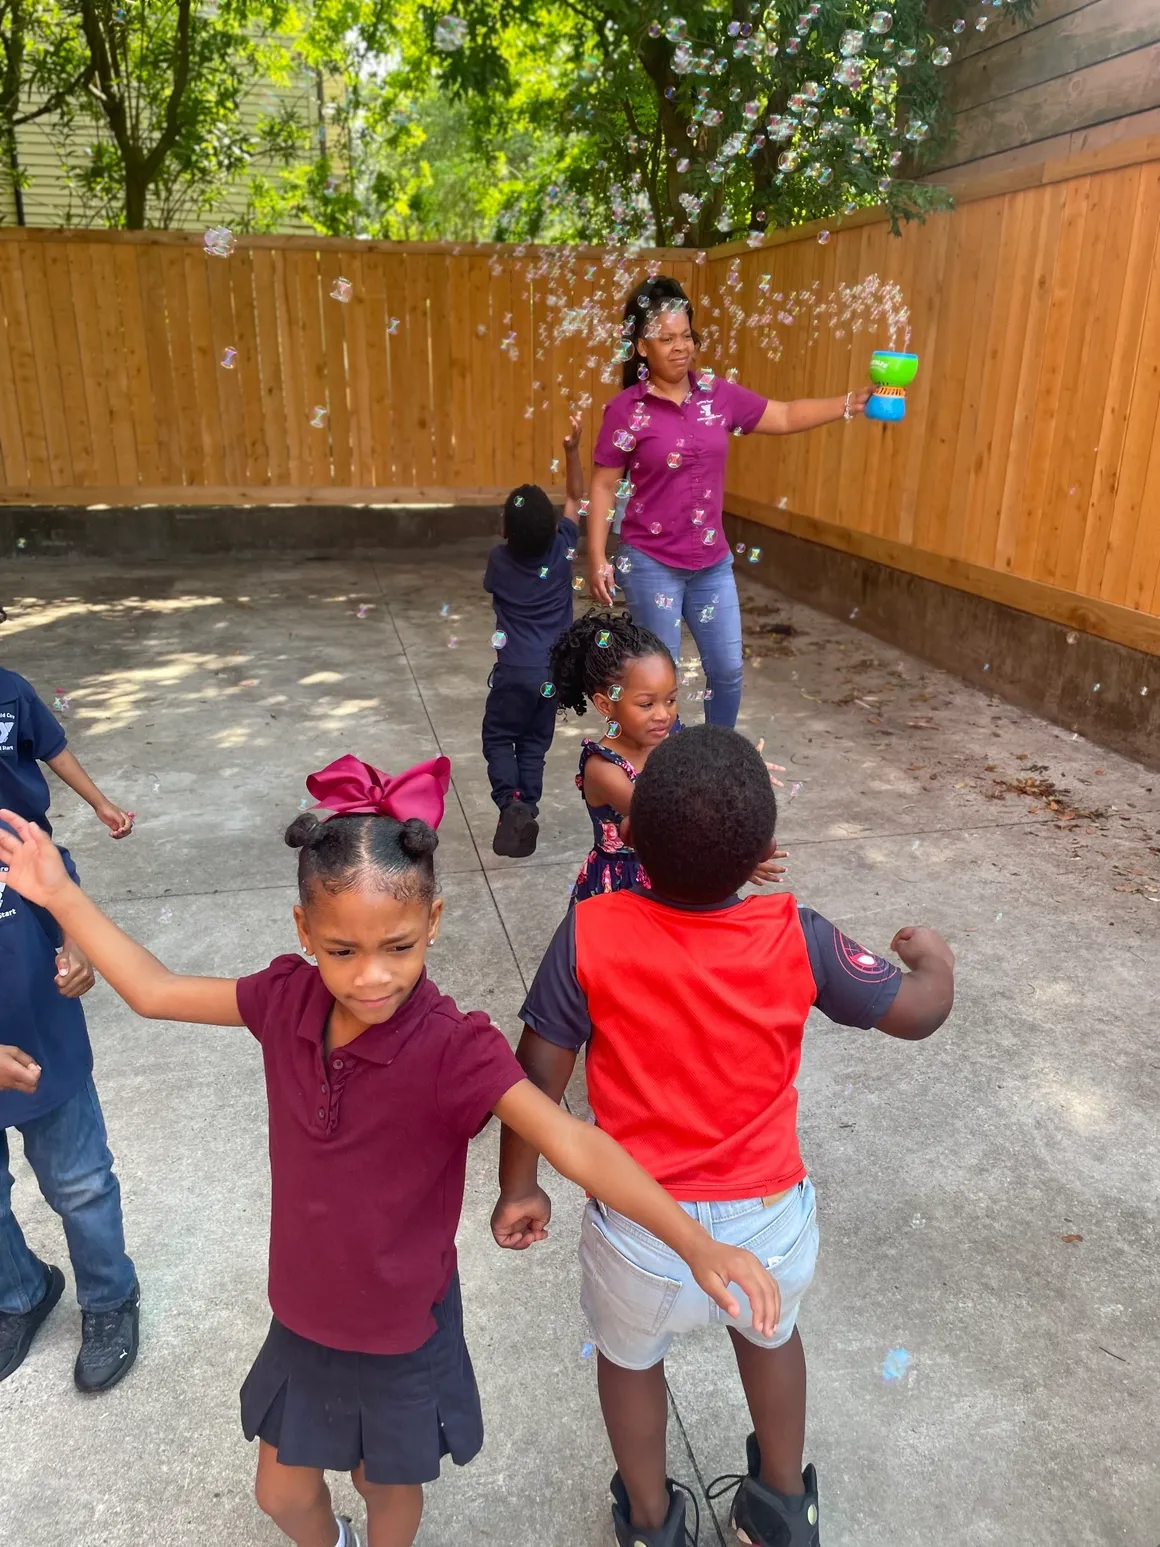 A group of children playing with bubbles in the yard.